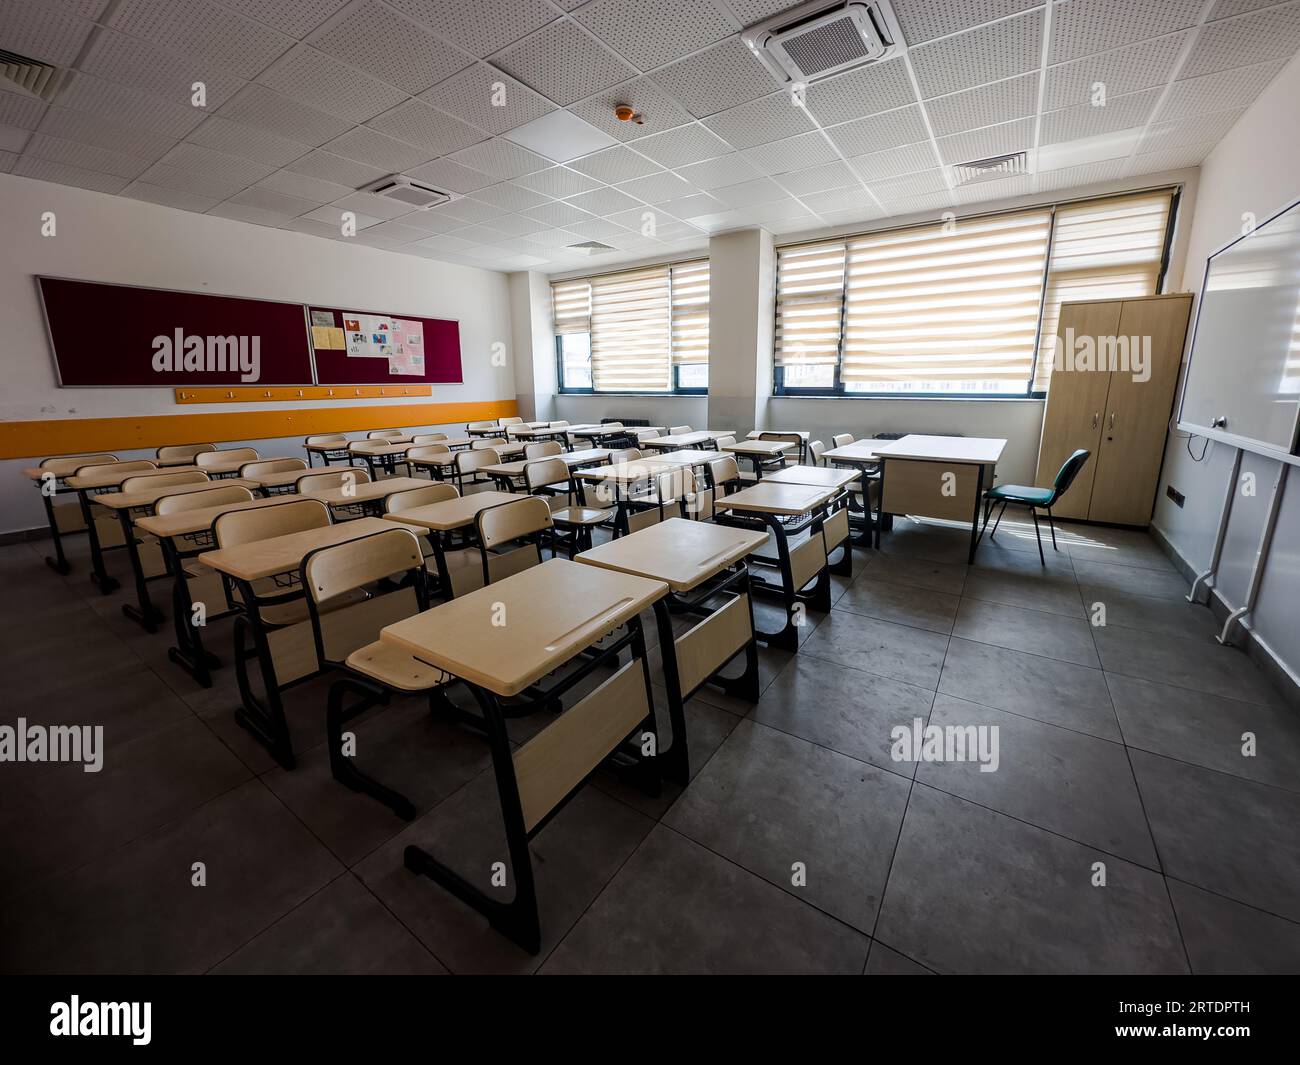 Classroom in background without ,No student or teacher . modern classroom environment. High quality photo Stock Photo